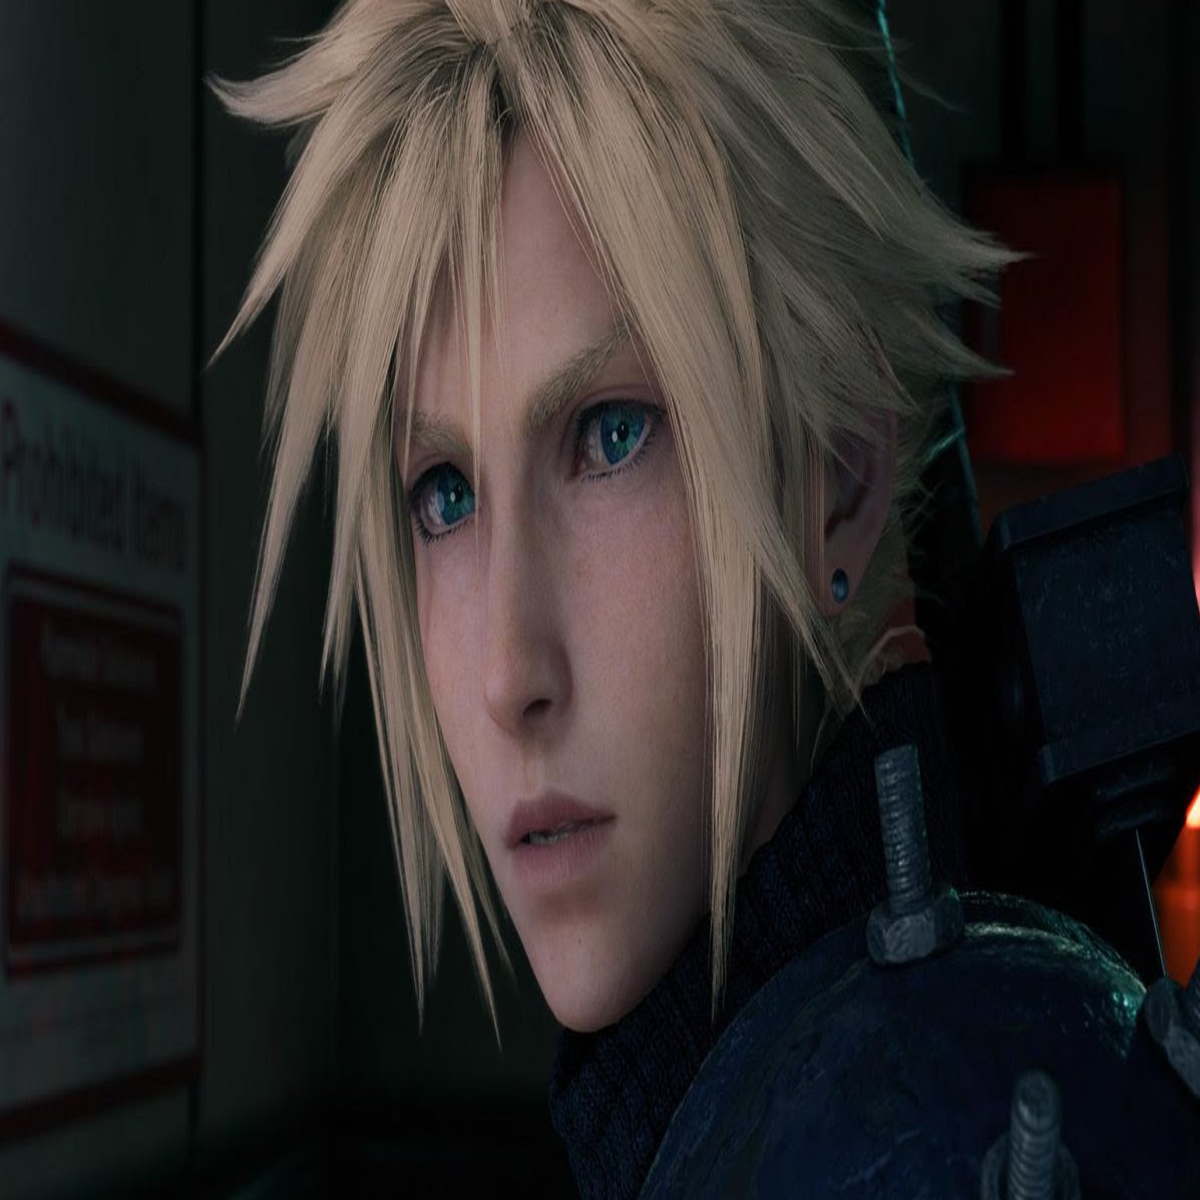 PS Plus March 2021: Final Fantasy VII Remake and more free games